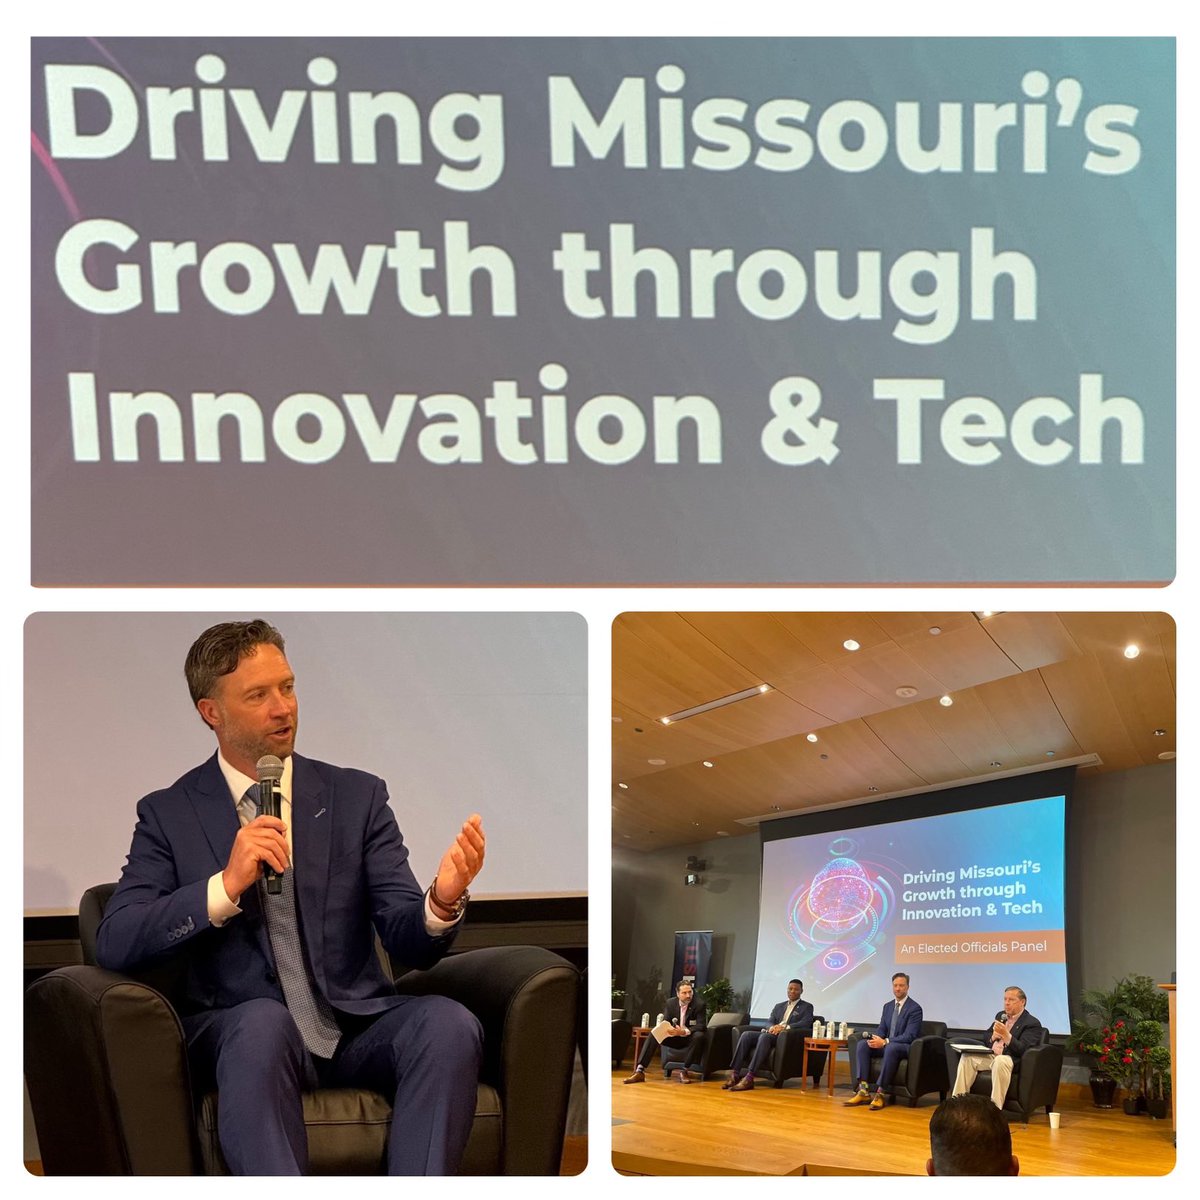 Today I joined @MoTechCorp @JackScatizzi, and my colleagues Sen. Brian Williams, & Rep. Louis Riggs at Driving Missouri’s Growth through Innovation and Tech. #LincolnforLG